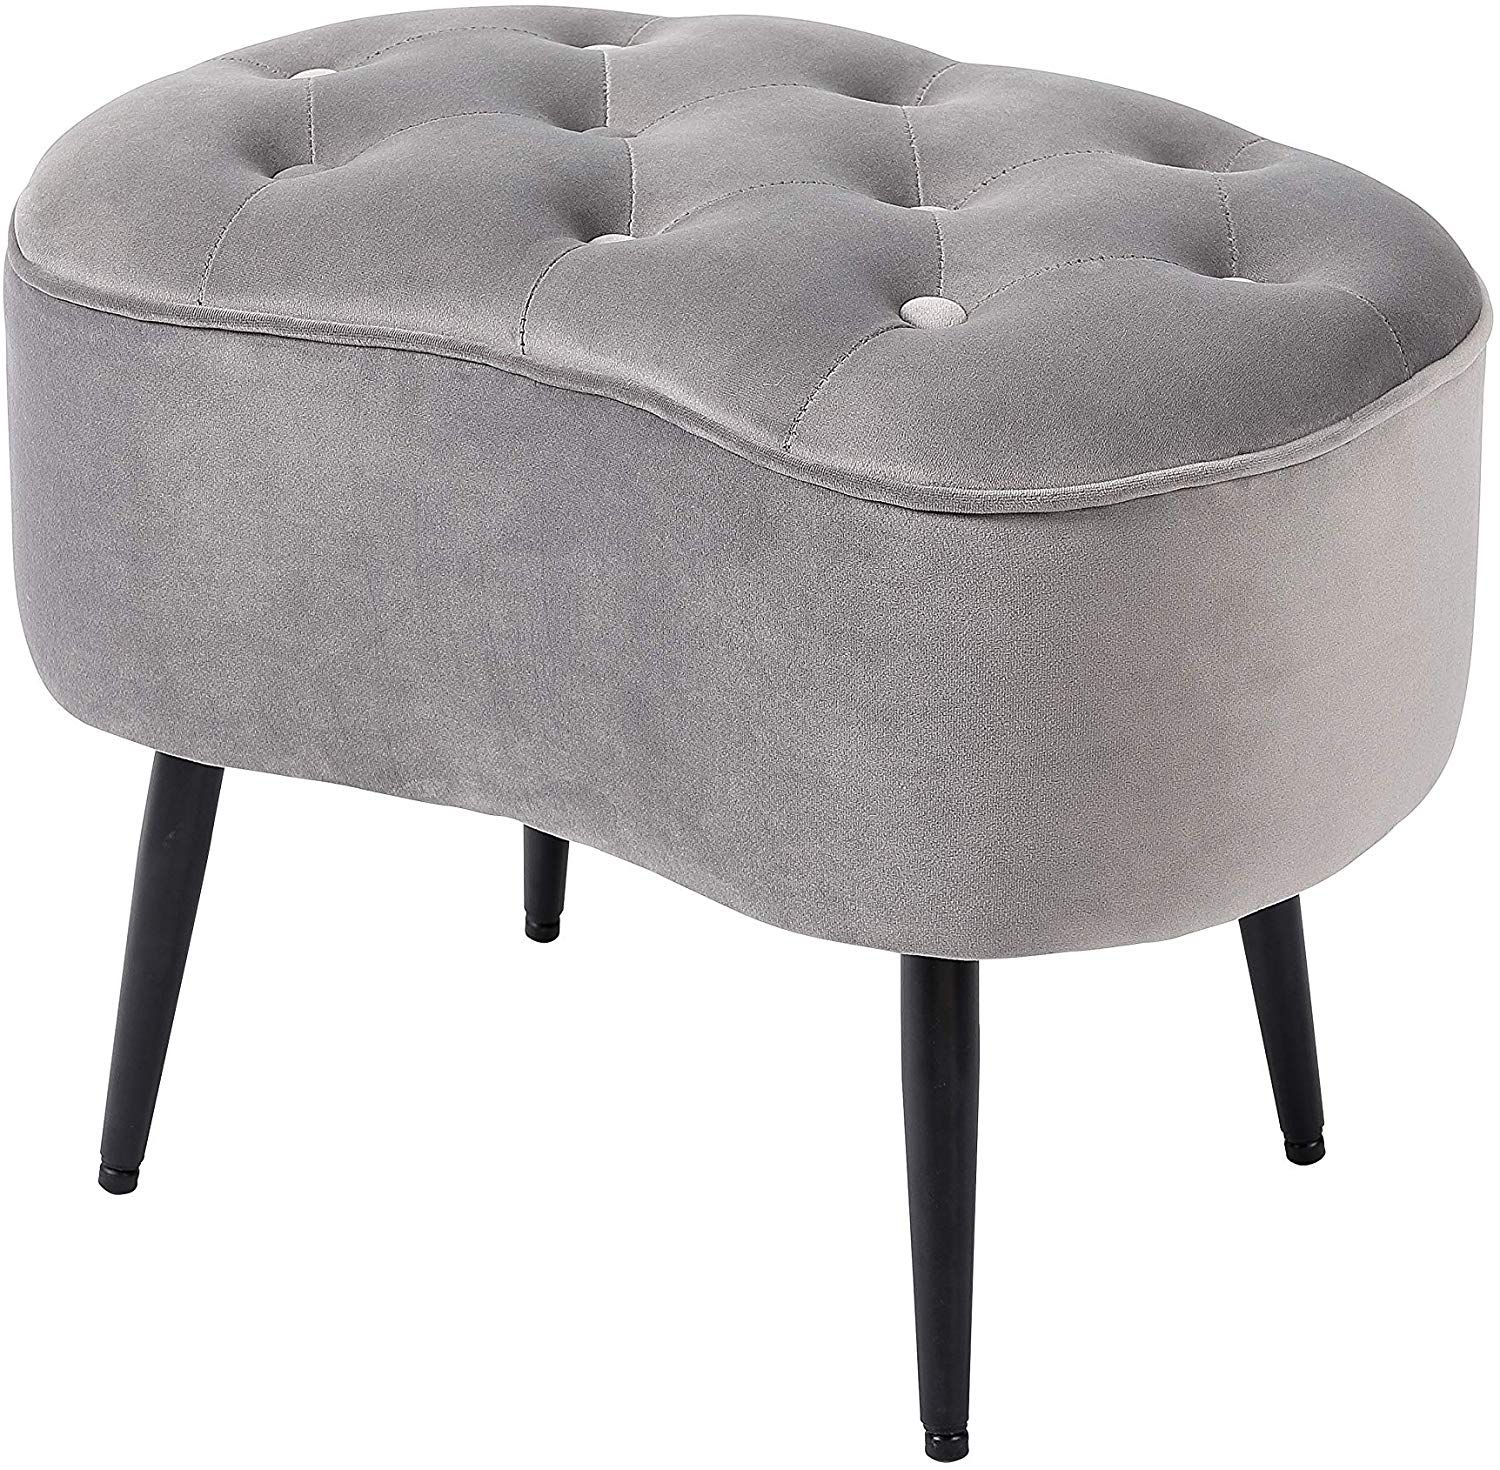 Birdrock Home Tufted Oblong Grey Ottoman – Velvet Foot Stool – Mid For Ivory Button Tufted Vanity Stools (View 5 of 20)